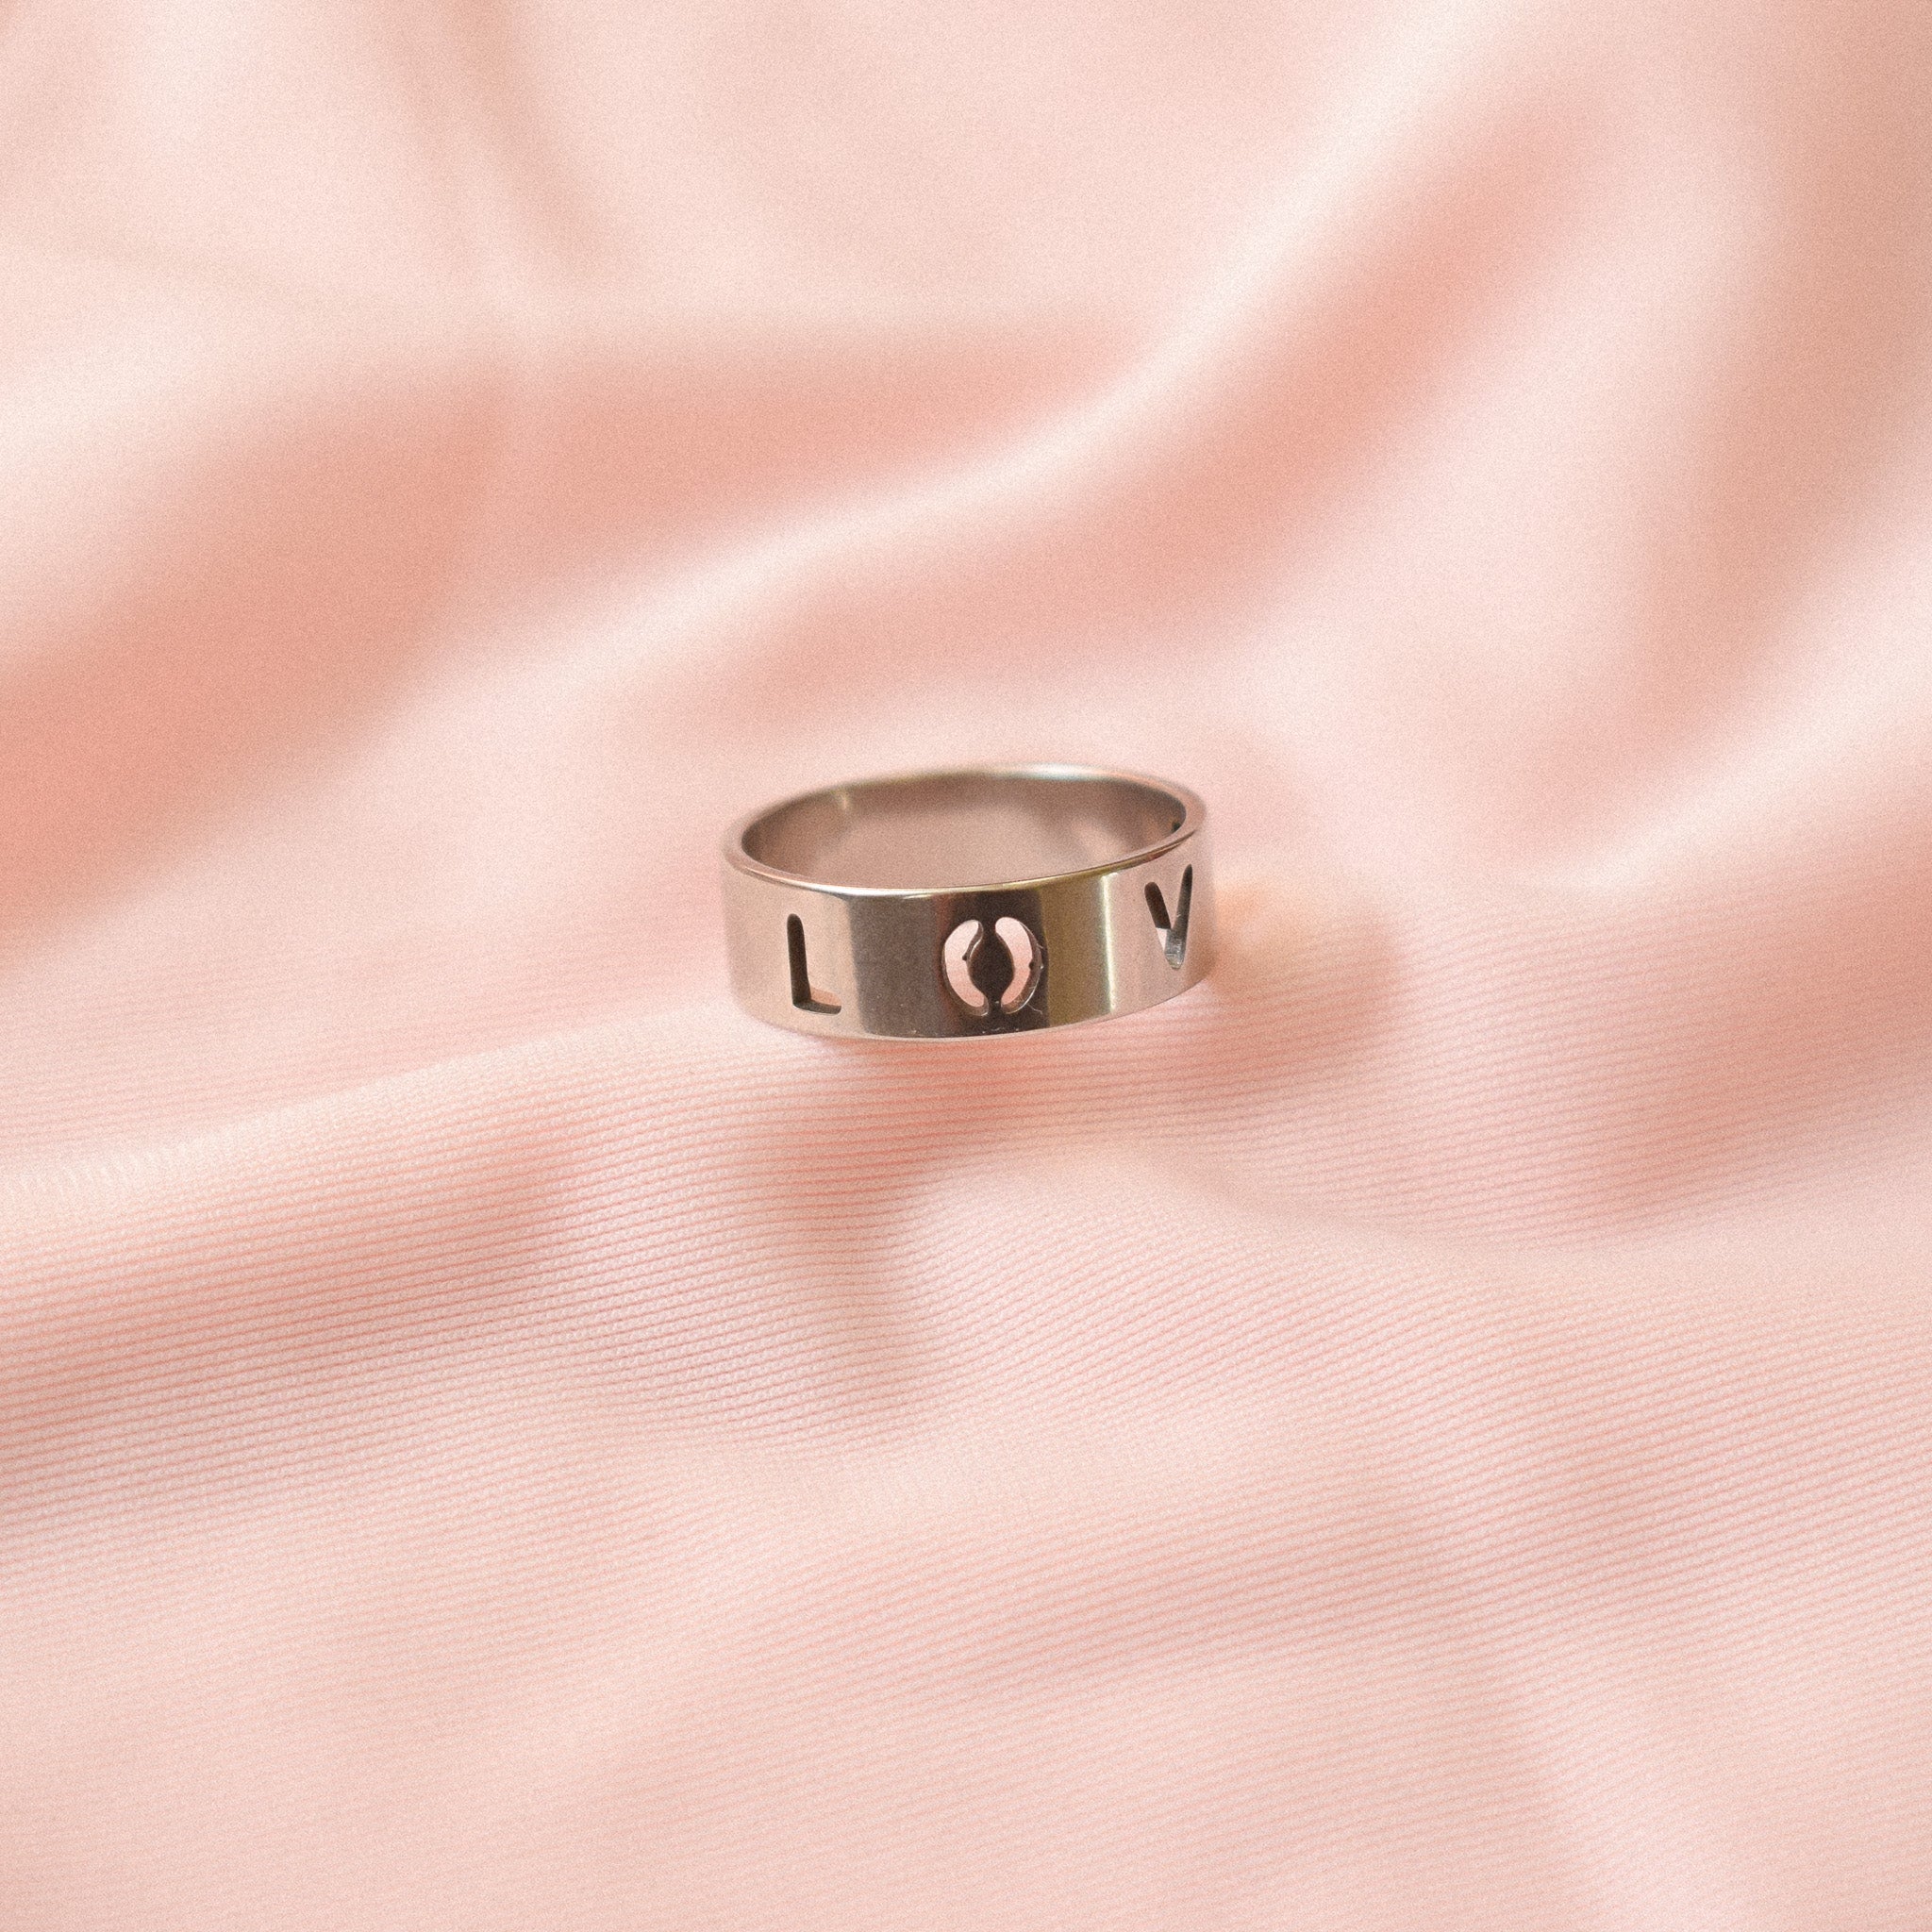 "Say it" LOVE Ring